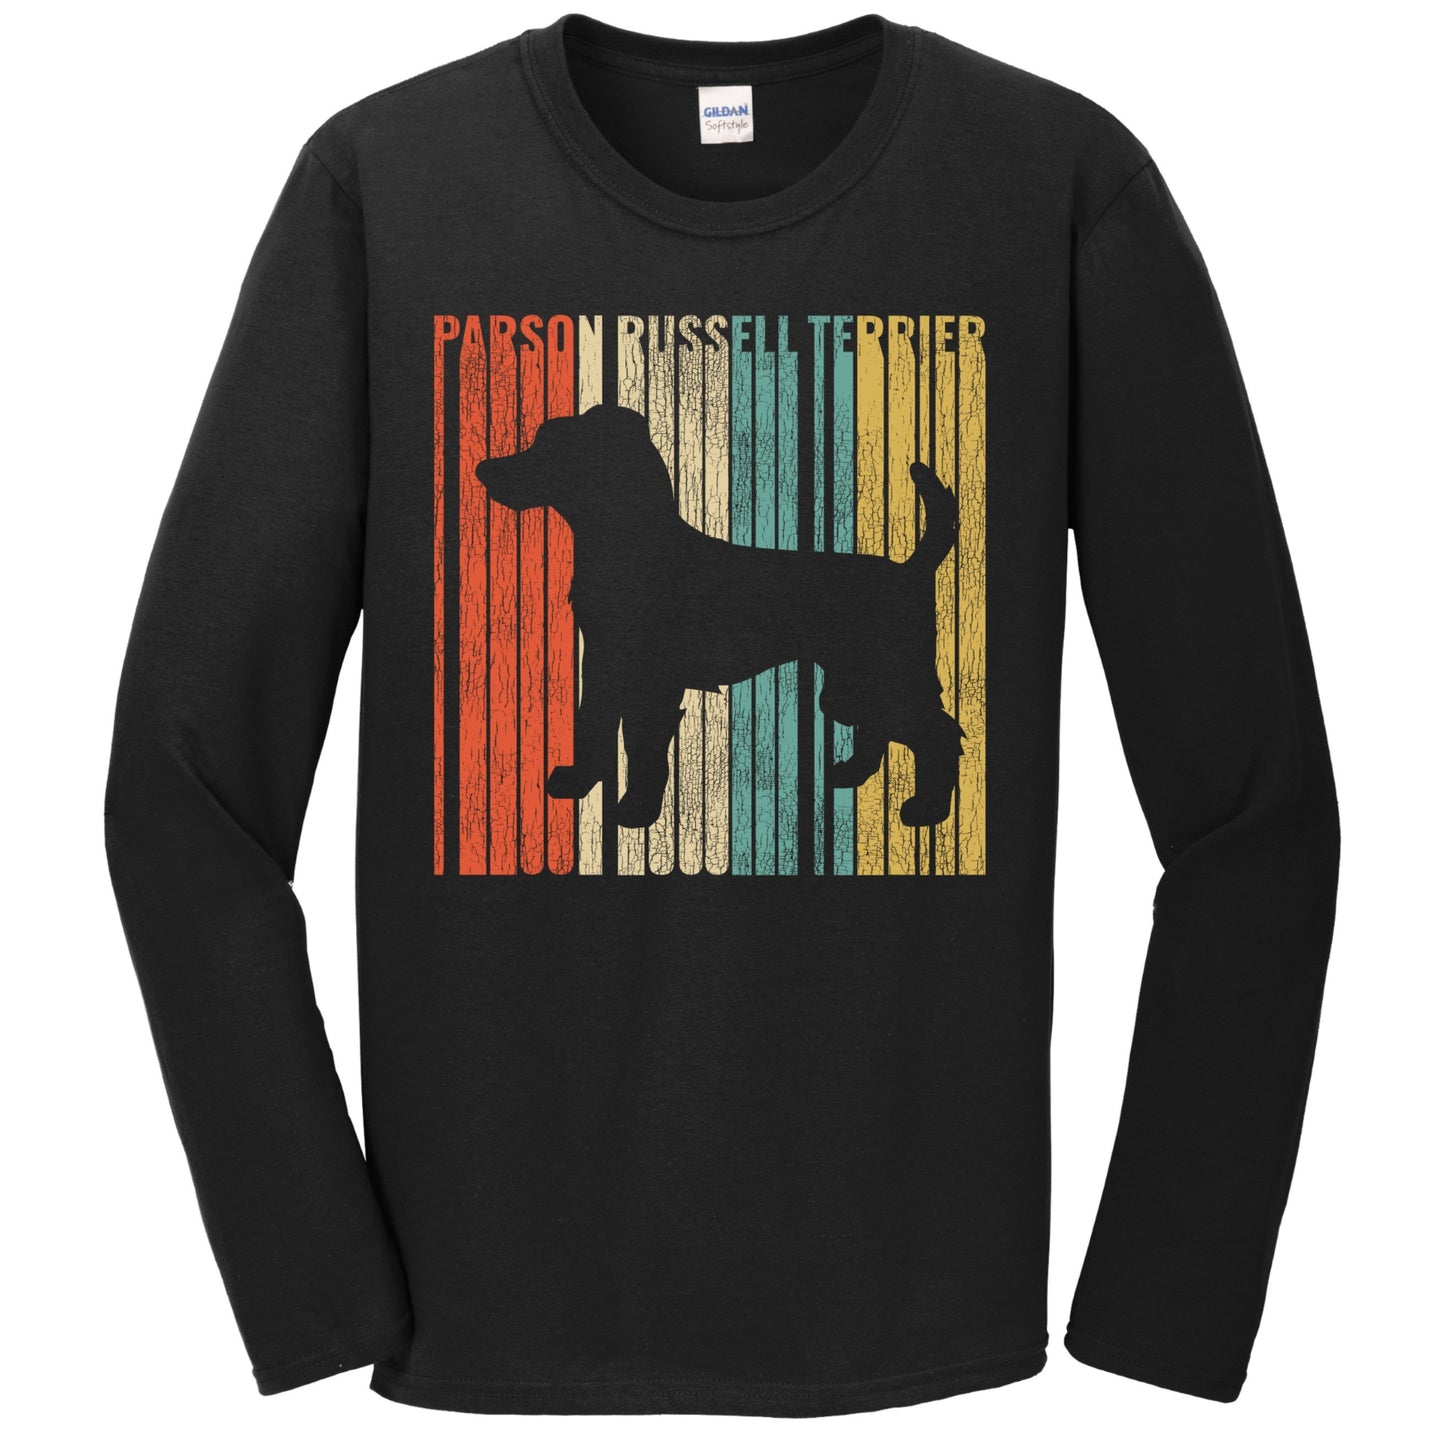 Retro 1970's Style Parson Russell Terrier Dog Silhouette Cracked Distressed Long Sleeve T-Shirt